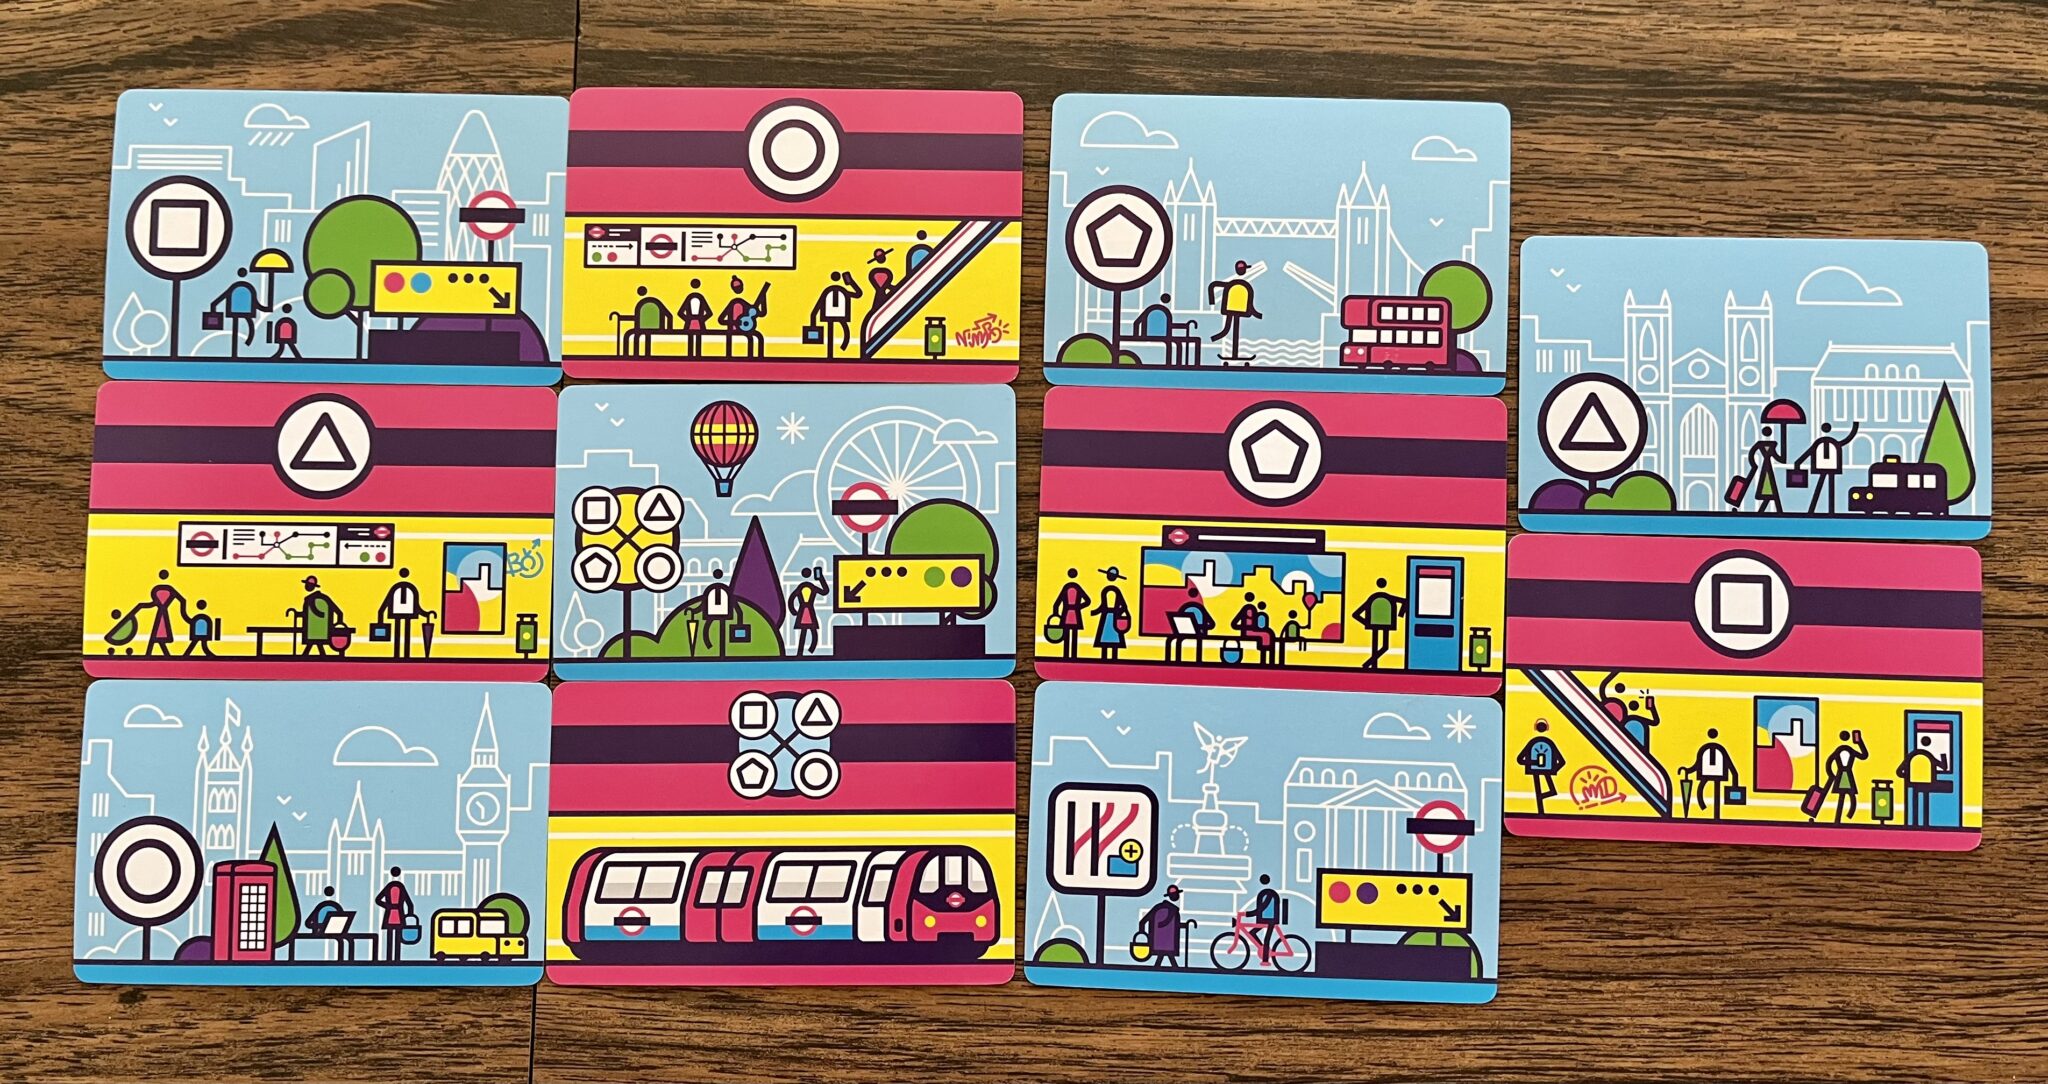 Next Station: London cards for movement